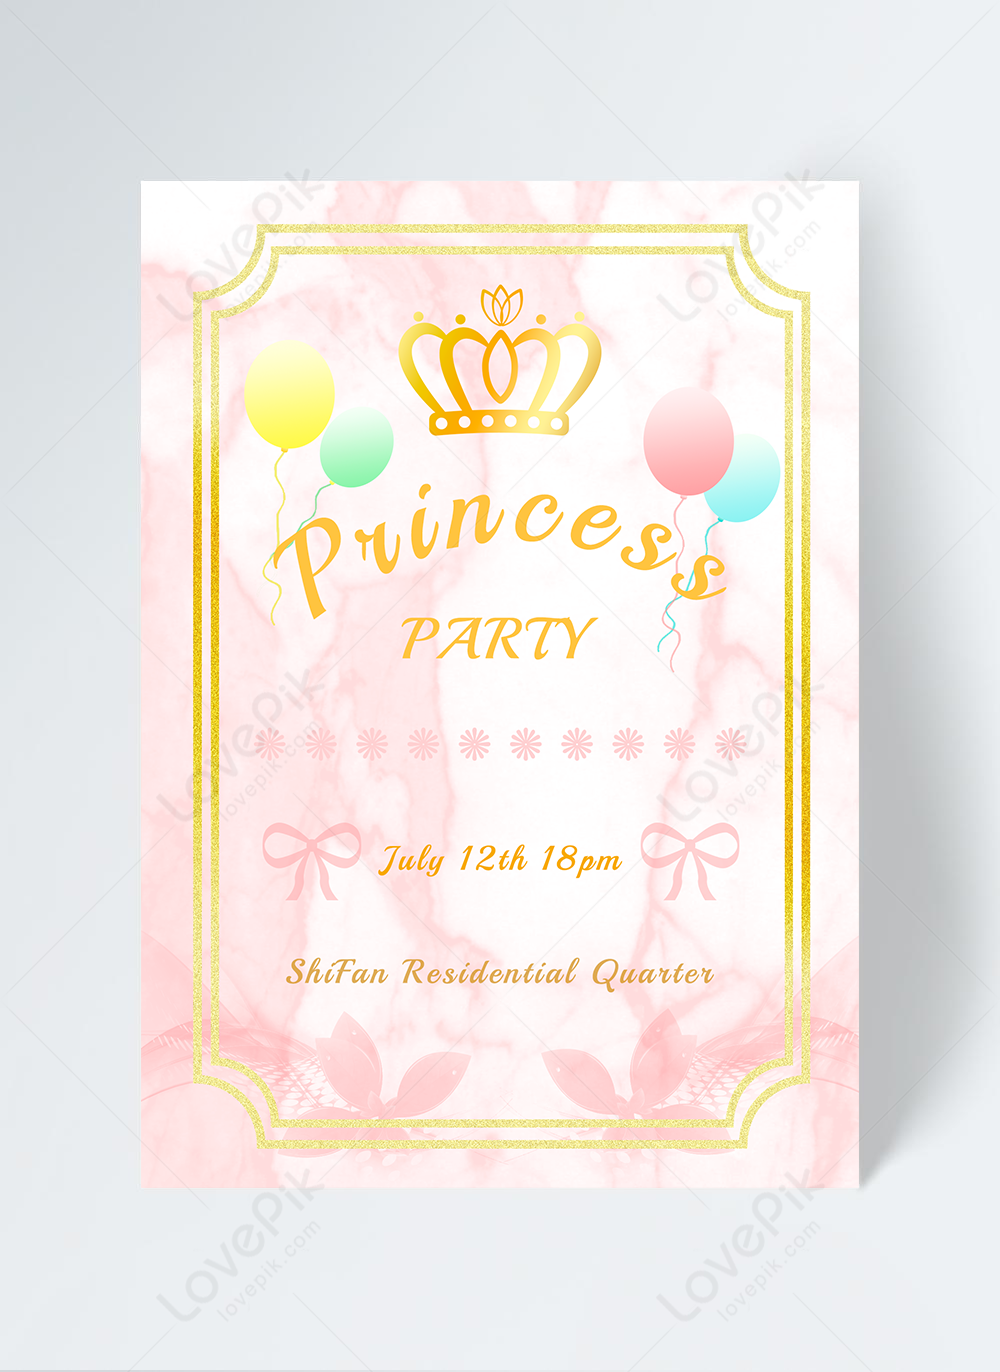 Fantasy Crown Pink Princess Birthday Party Invitation Template Image Picture Free Download 465444363 Lovepik Com